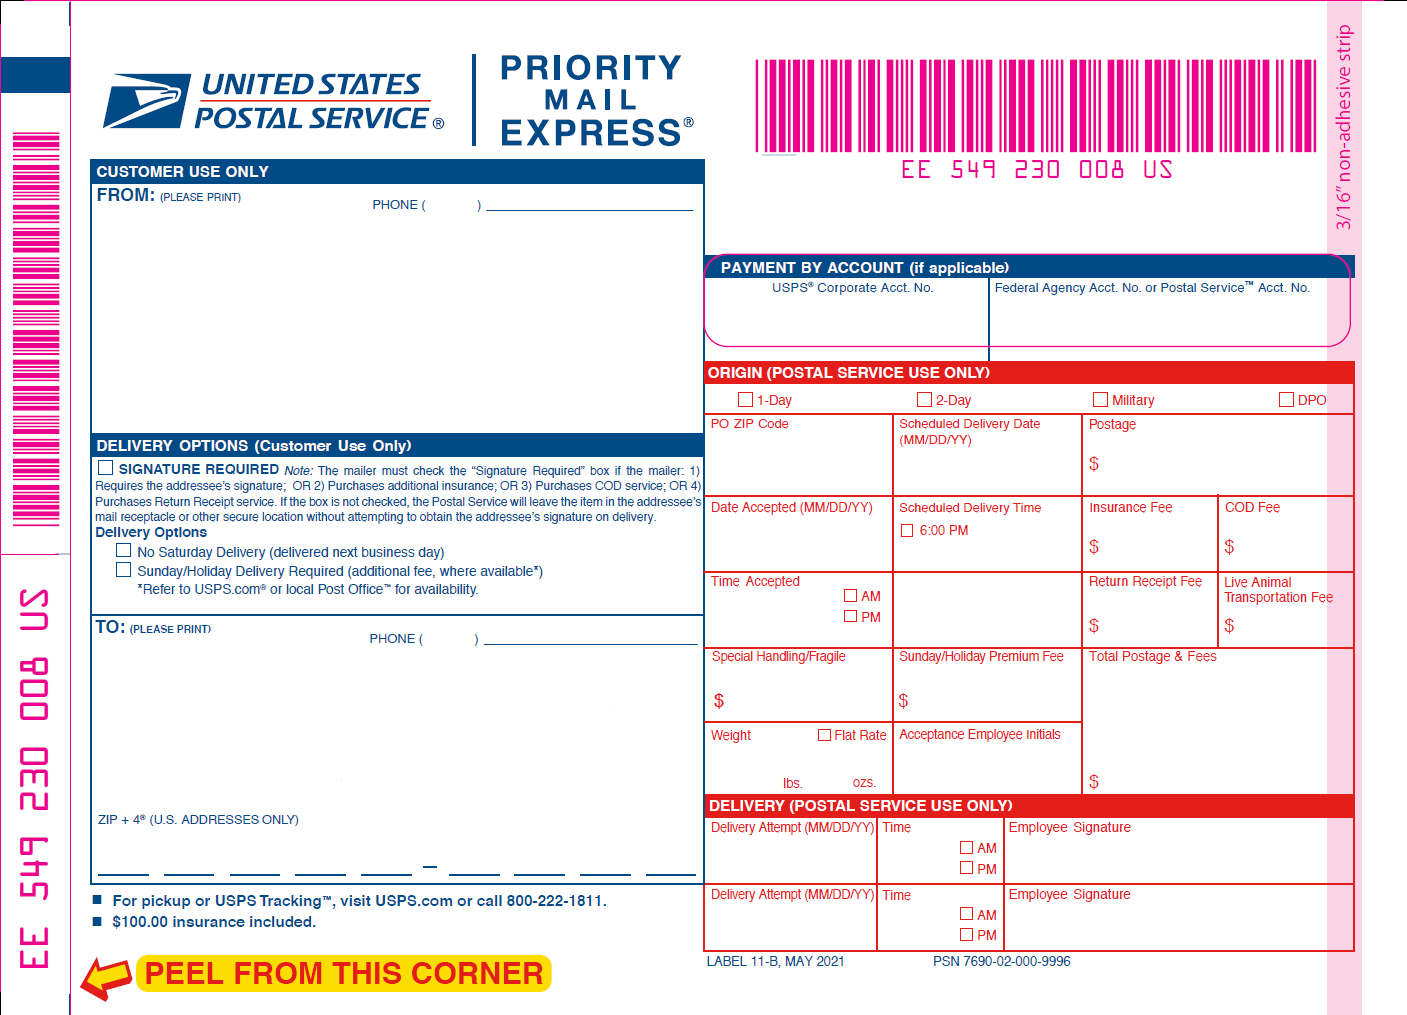 What are Priority Mail Express® Service Commitments/Guarantees?